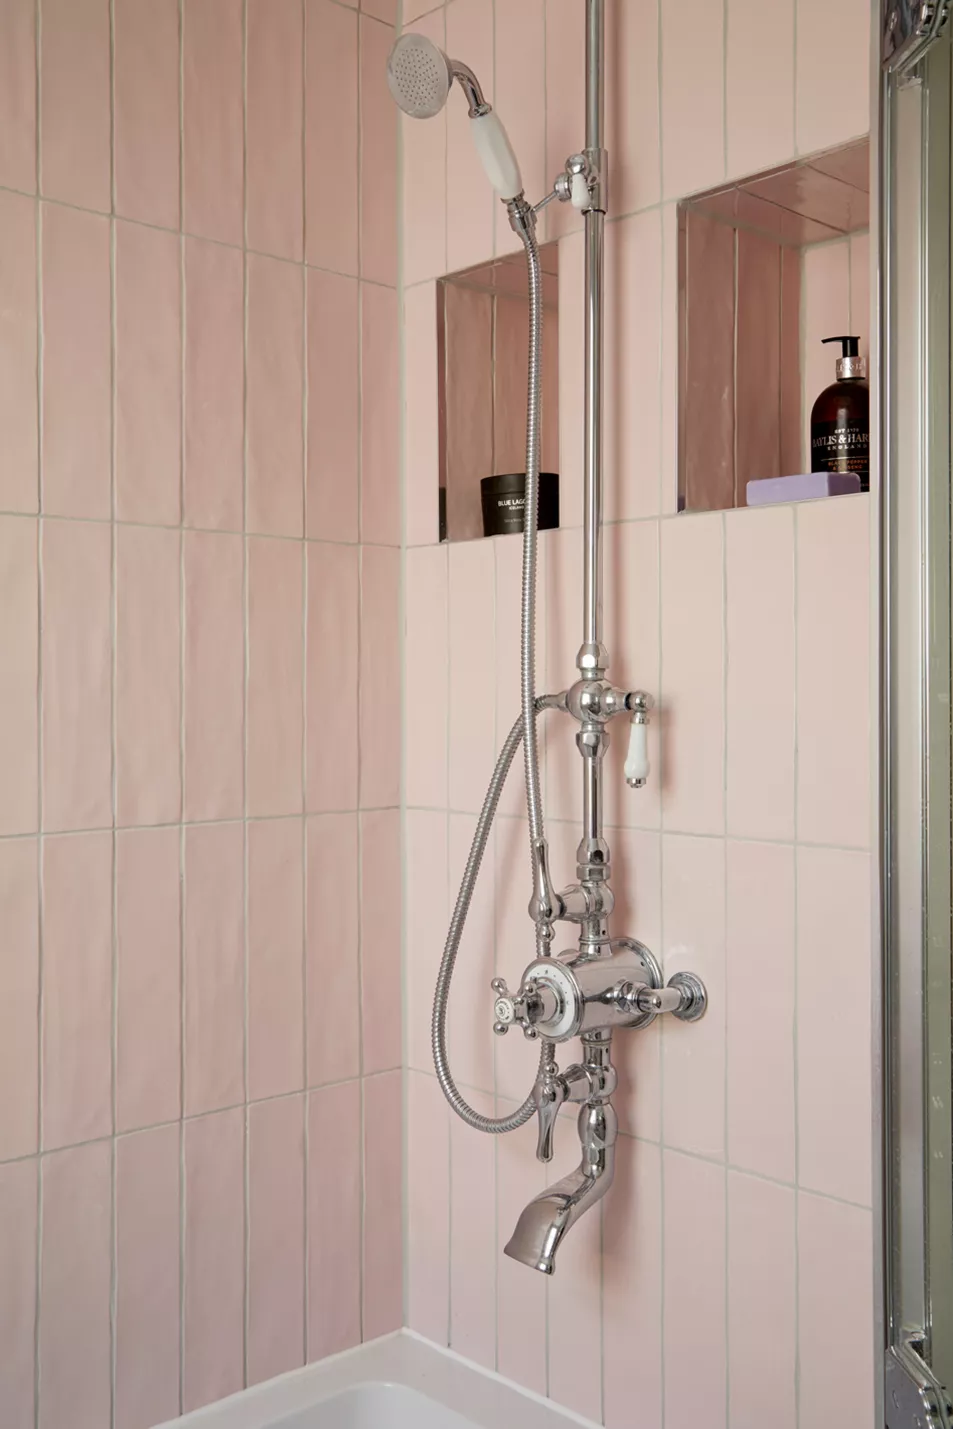 Tiled walk-in shower to illustrate stacked tiles trend